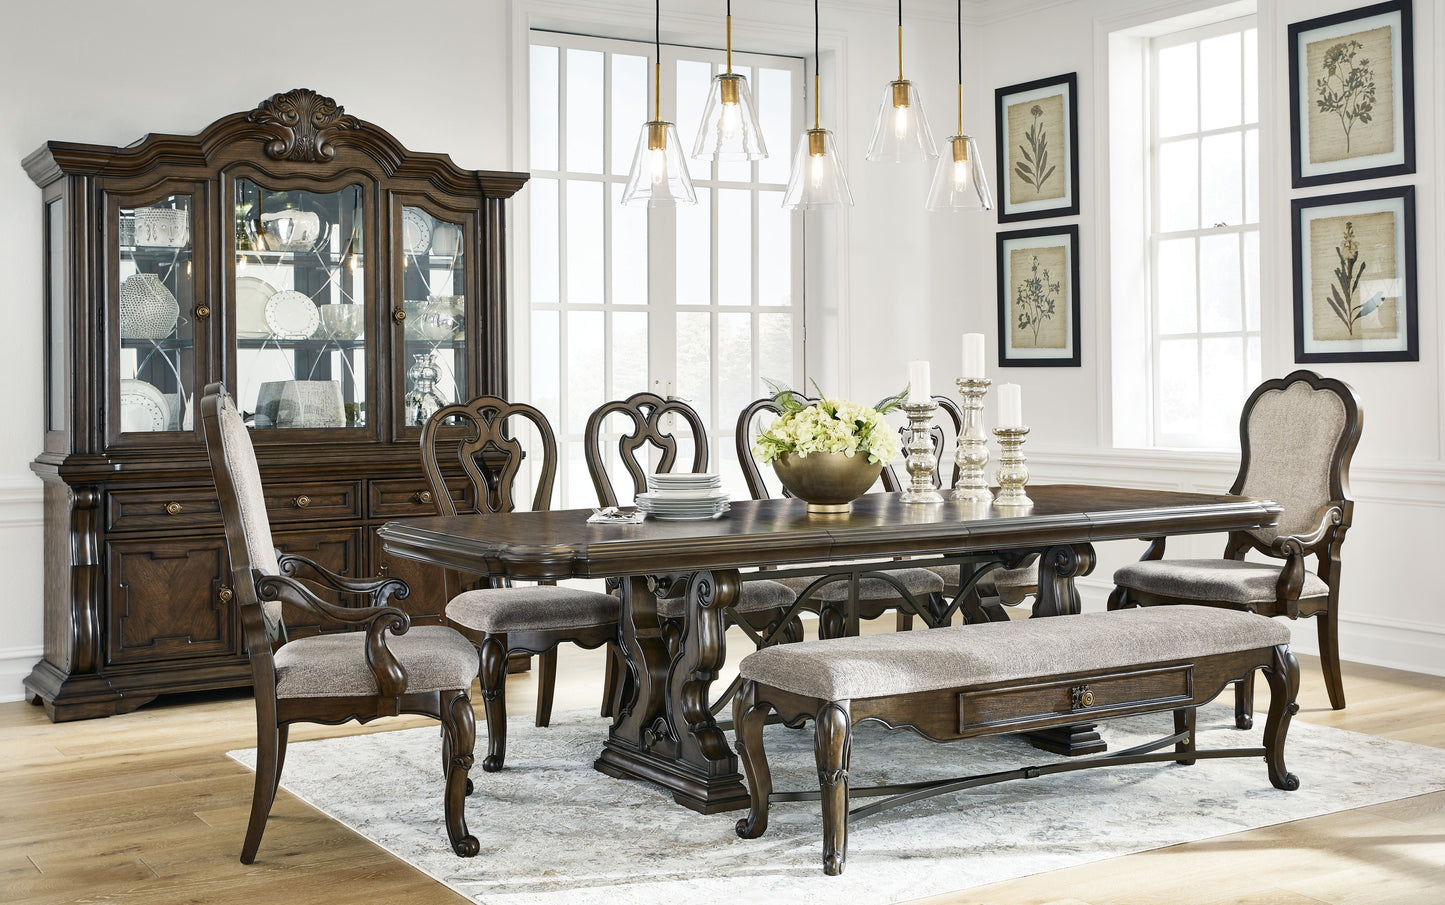 Maylee - Dark Brown - 11 Pc. - Dining Extension Table, 4 Side Chairs, 2 Arm Chairs, Storage Bench, Buffet And Hutch